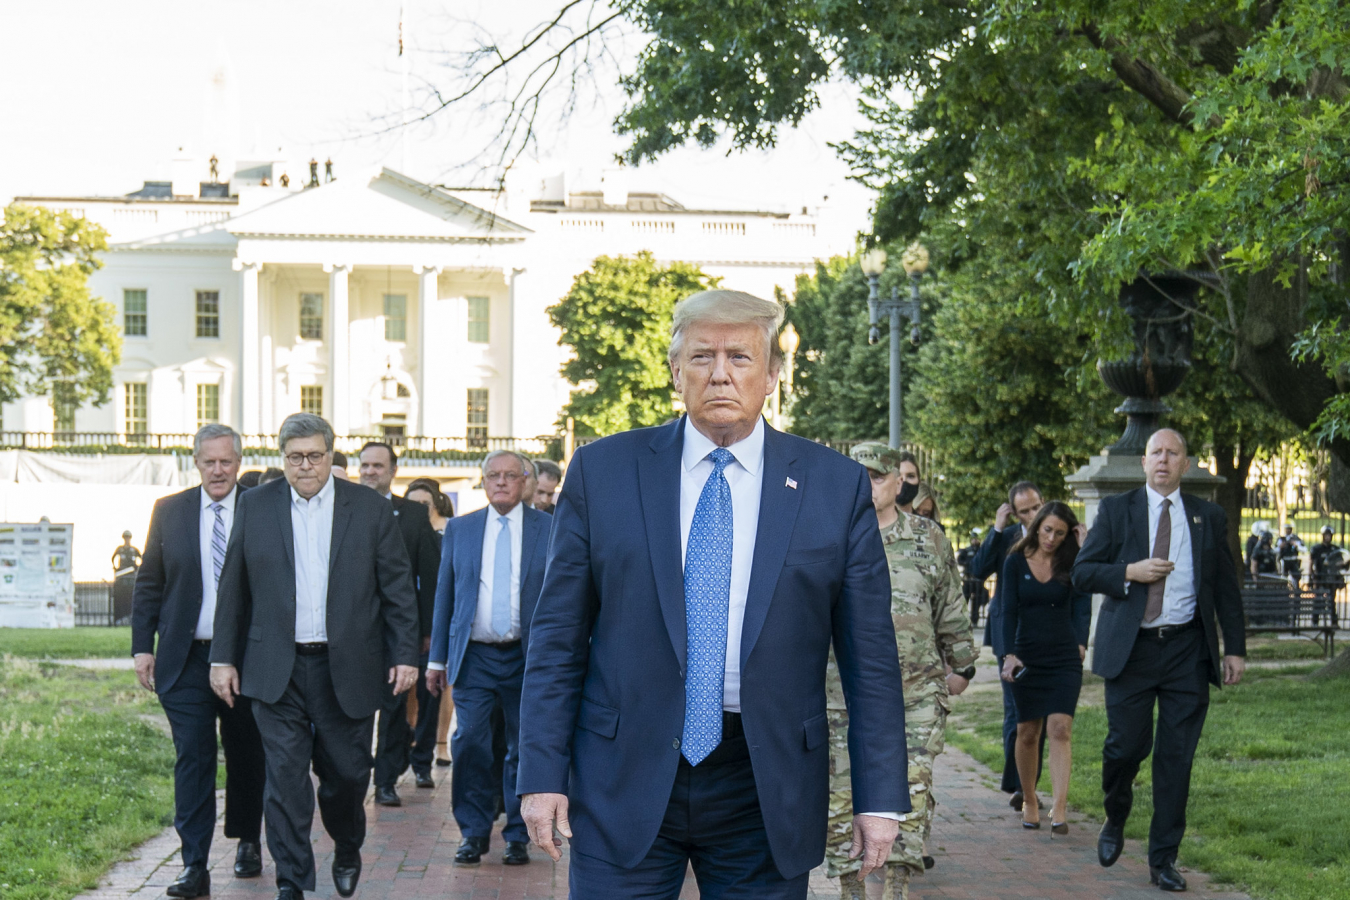 President Donald J. Trump walks from the White House Monday evening, June 1, 2020, to St. John’s Episcopal Church